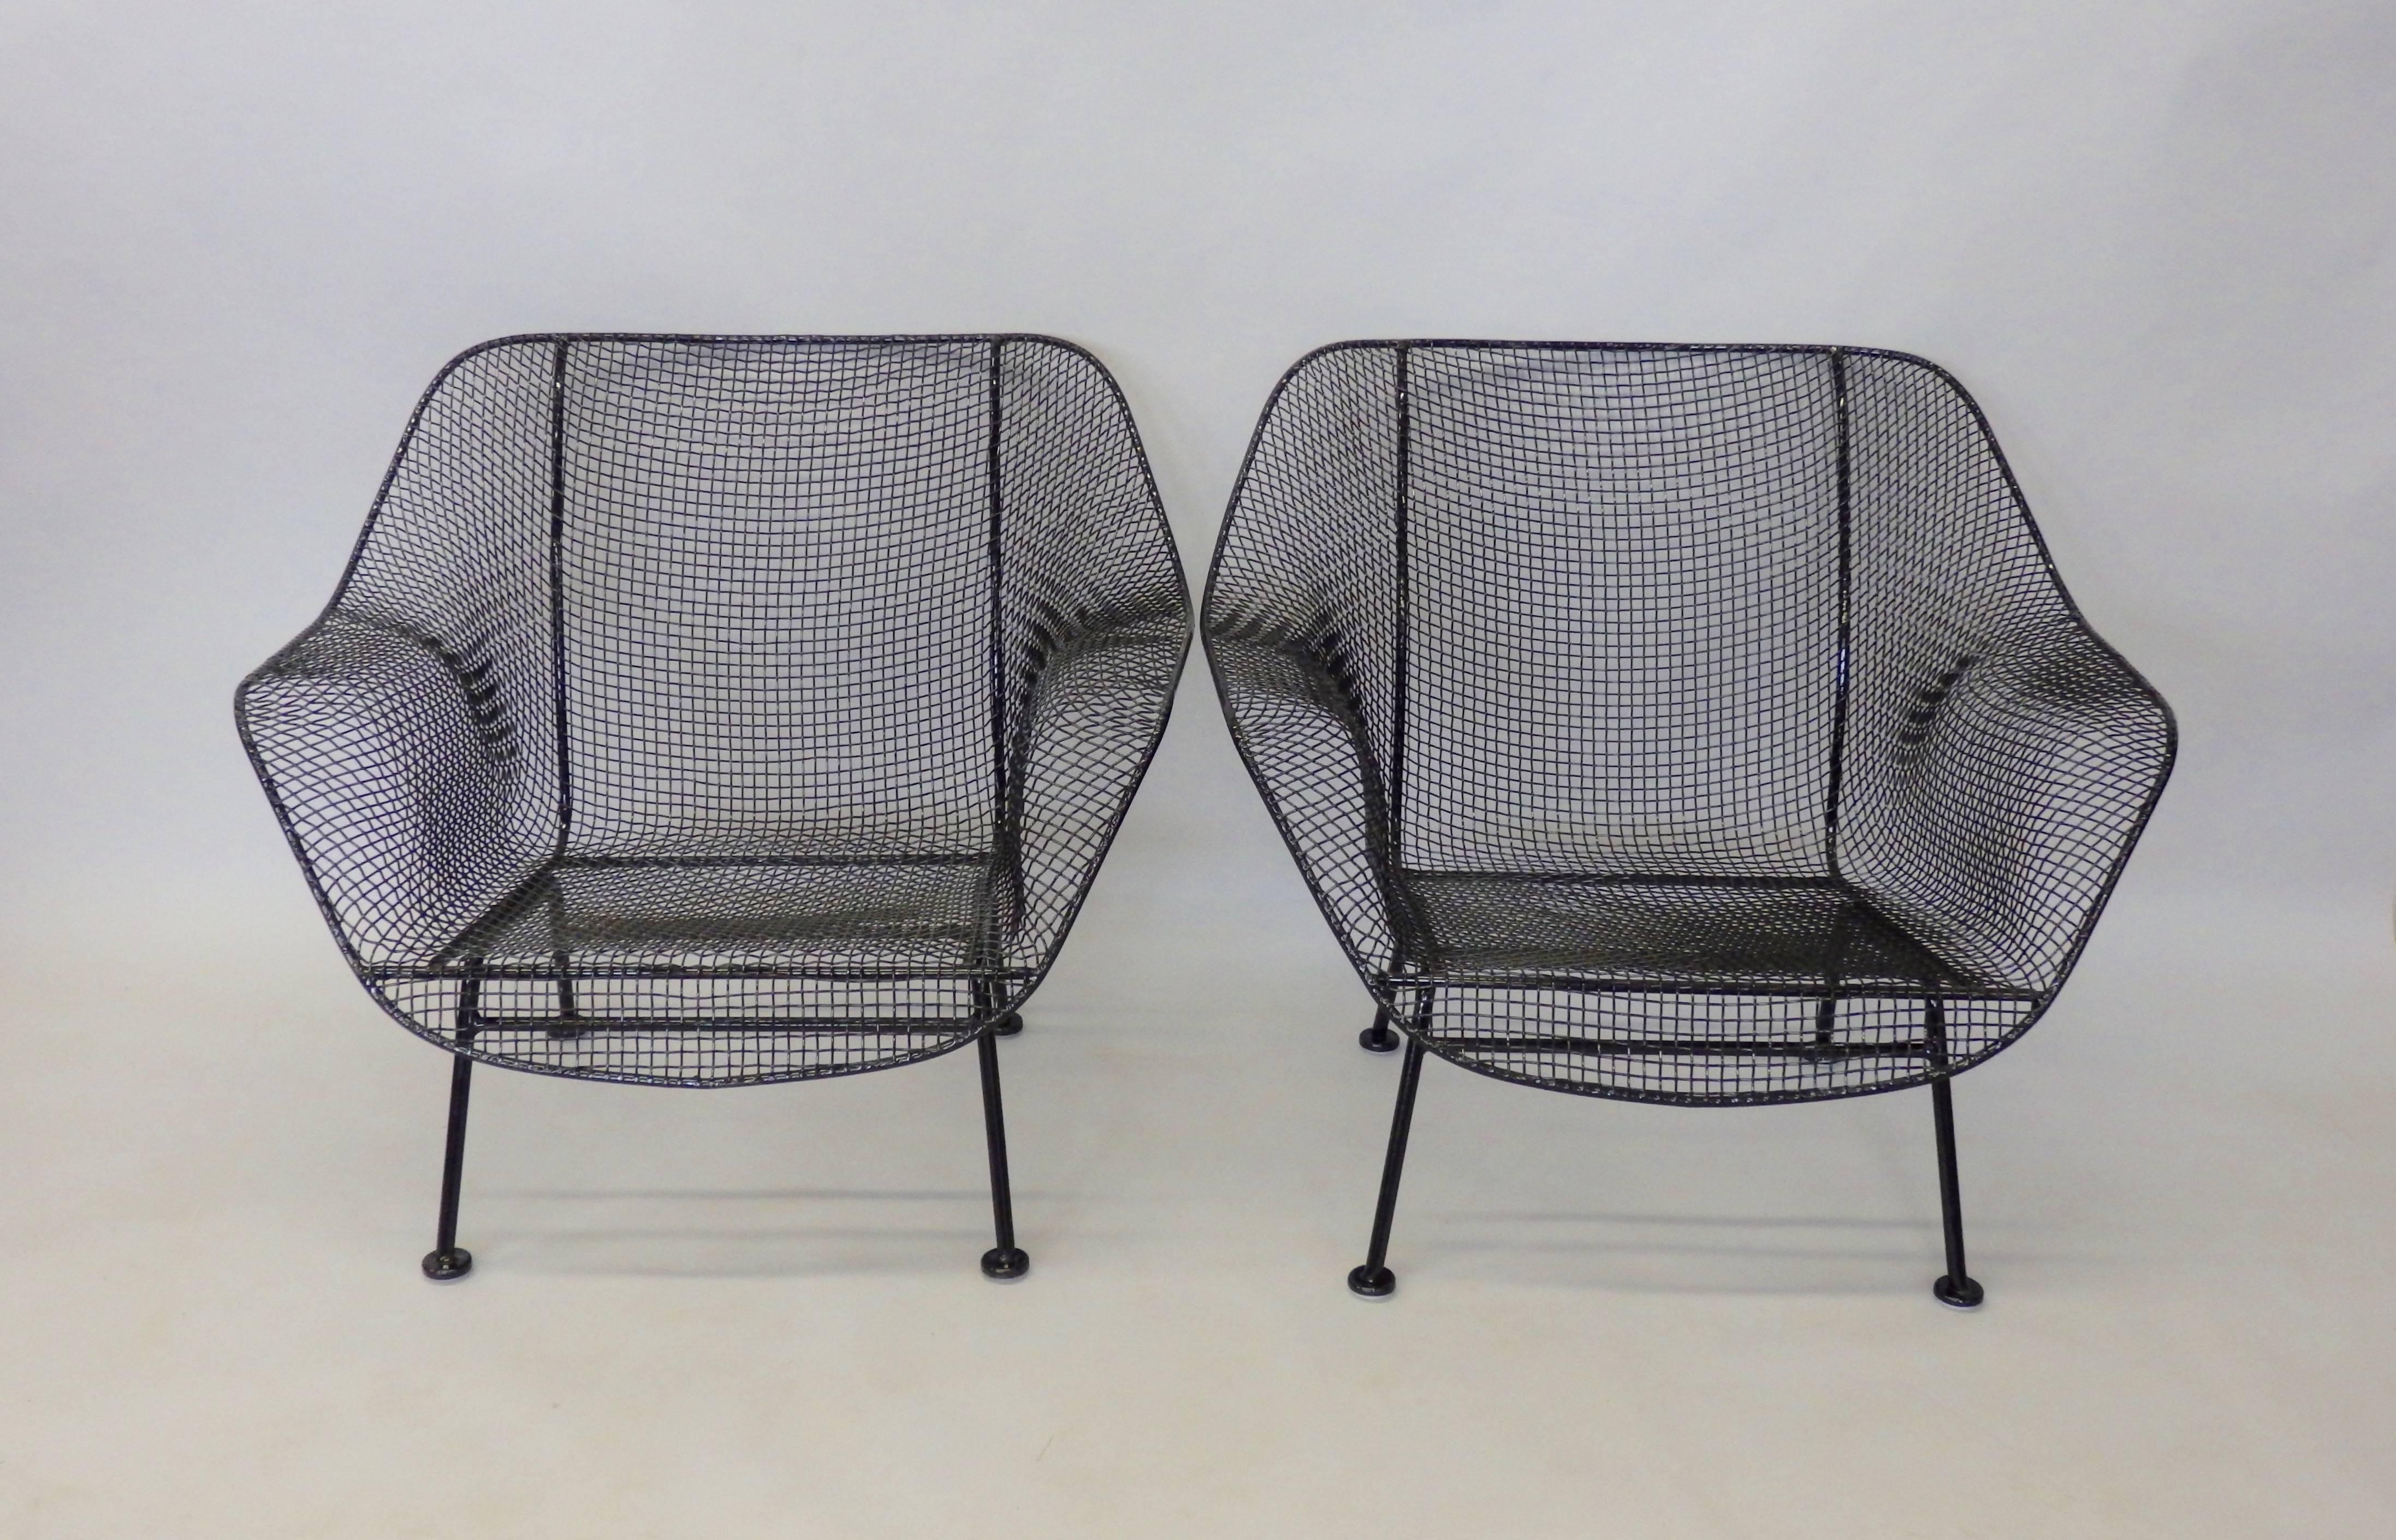 Powder-Coated Nicely Restored Russell Woodard Wrought Iron with Steel Mesh Lounge Chairs, Pair